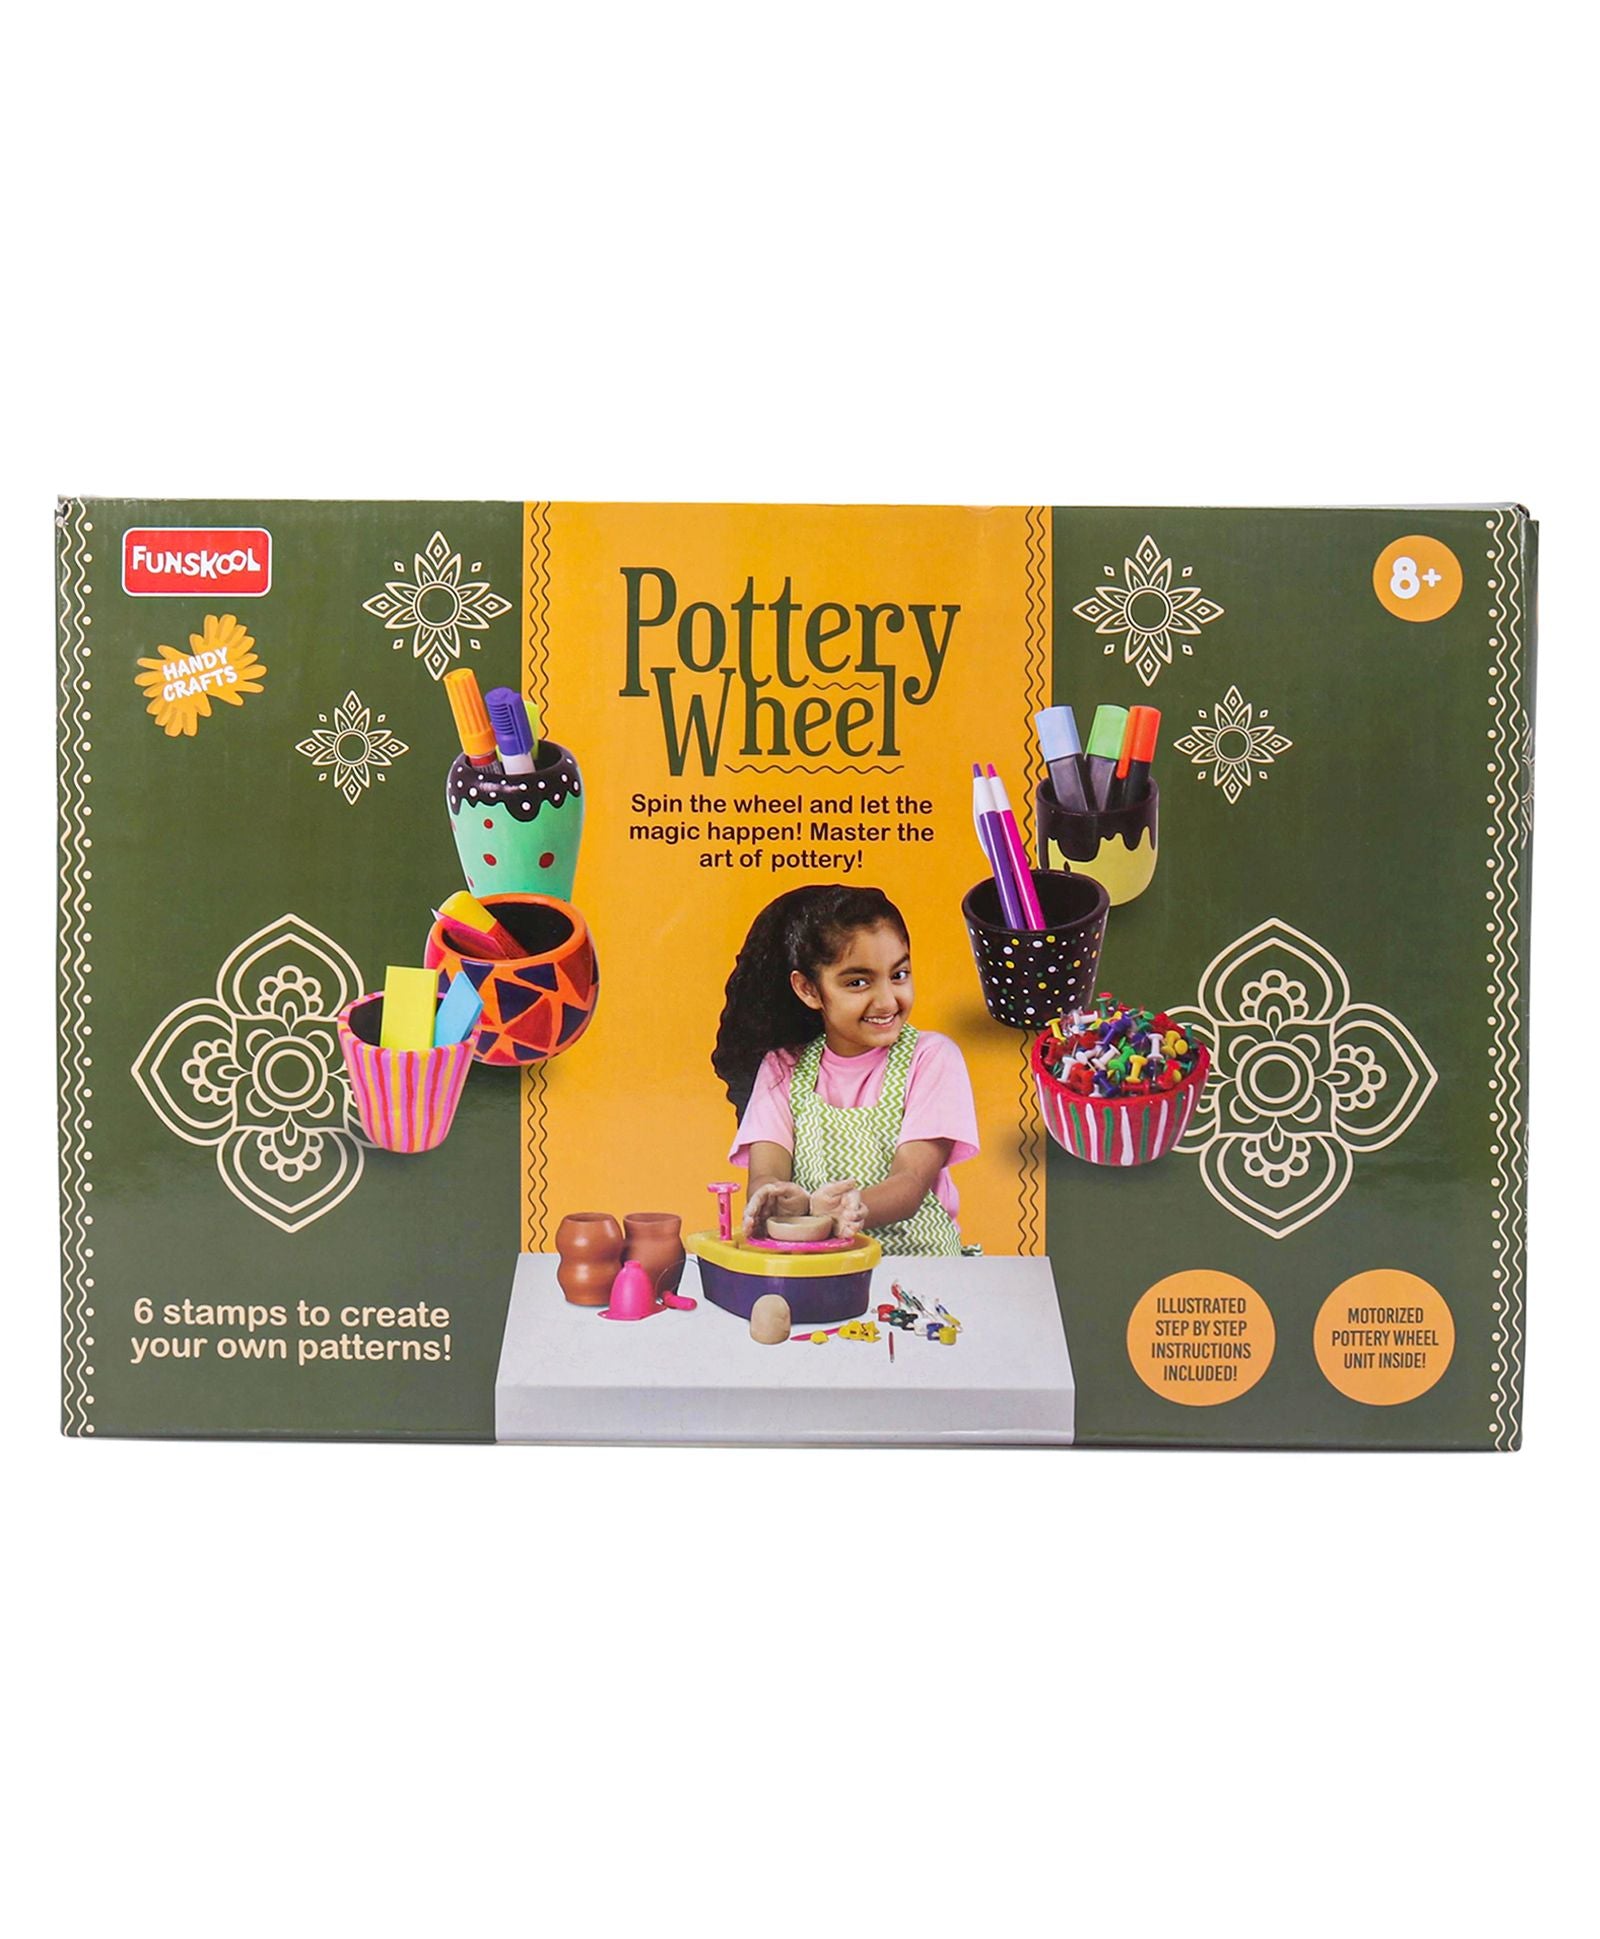 Funskool Handycrafts - Pottery Wheel Make and Decorate Clay Pots - Pot Making and Sculpting Kit for Ages 8+